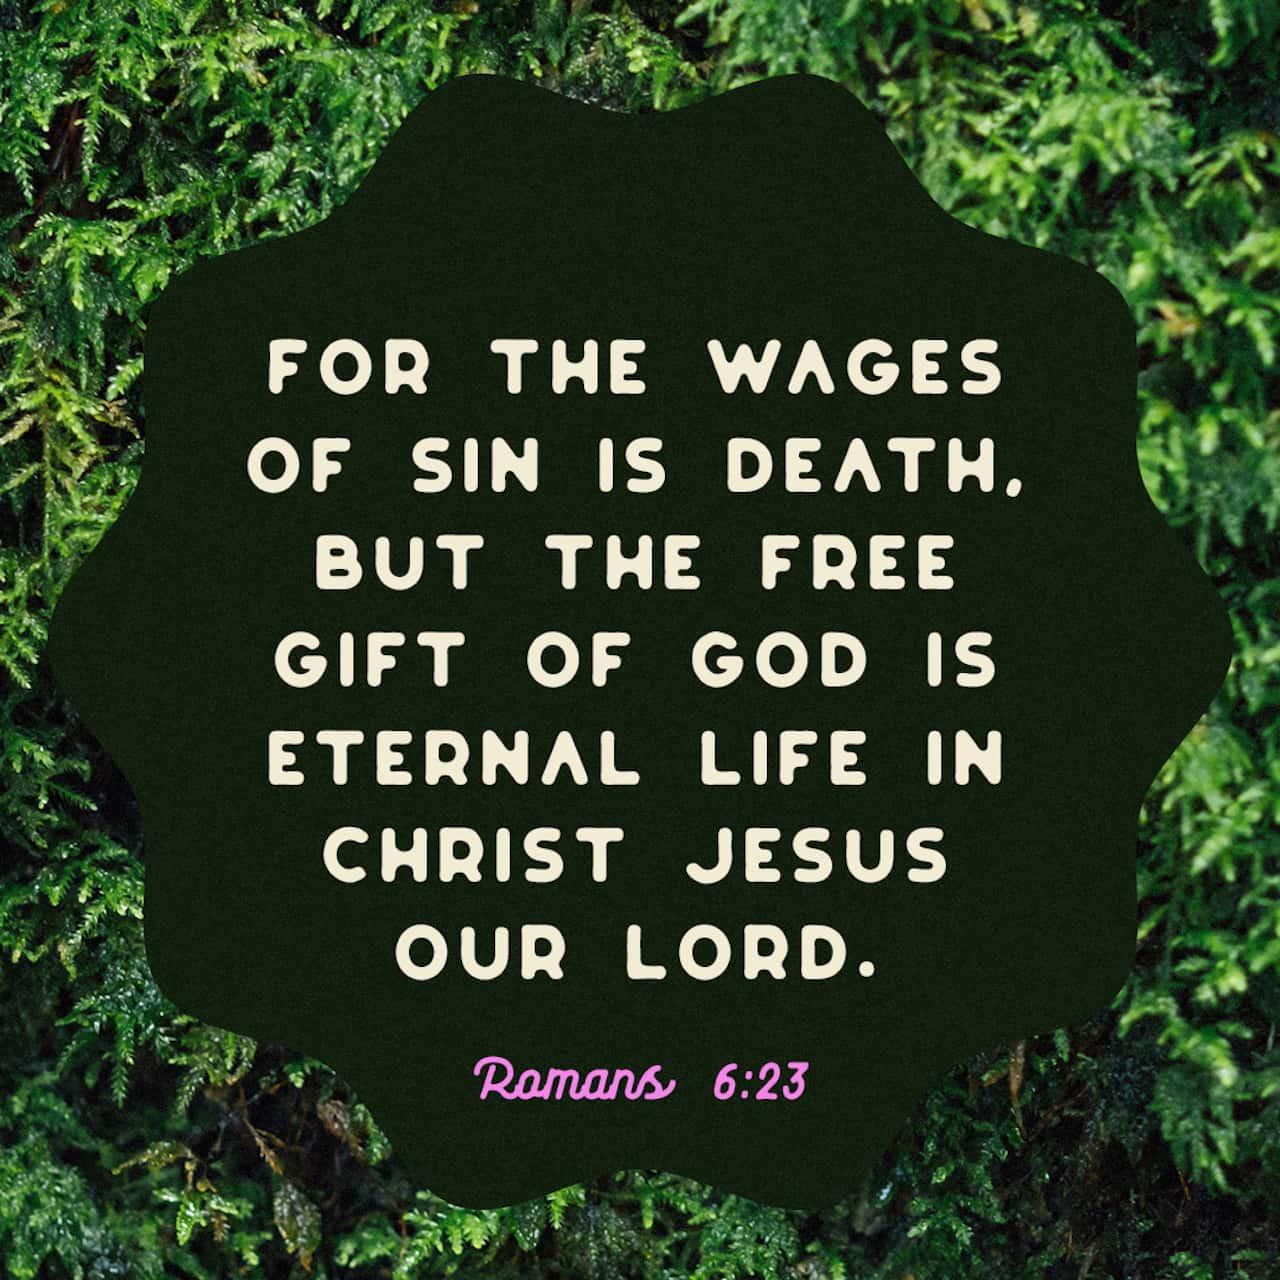 Bible Verse of the Day - day 90 - image 62584 (Romans 6:23)